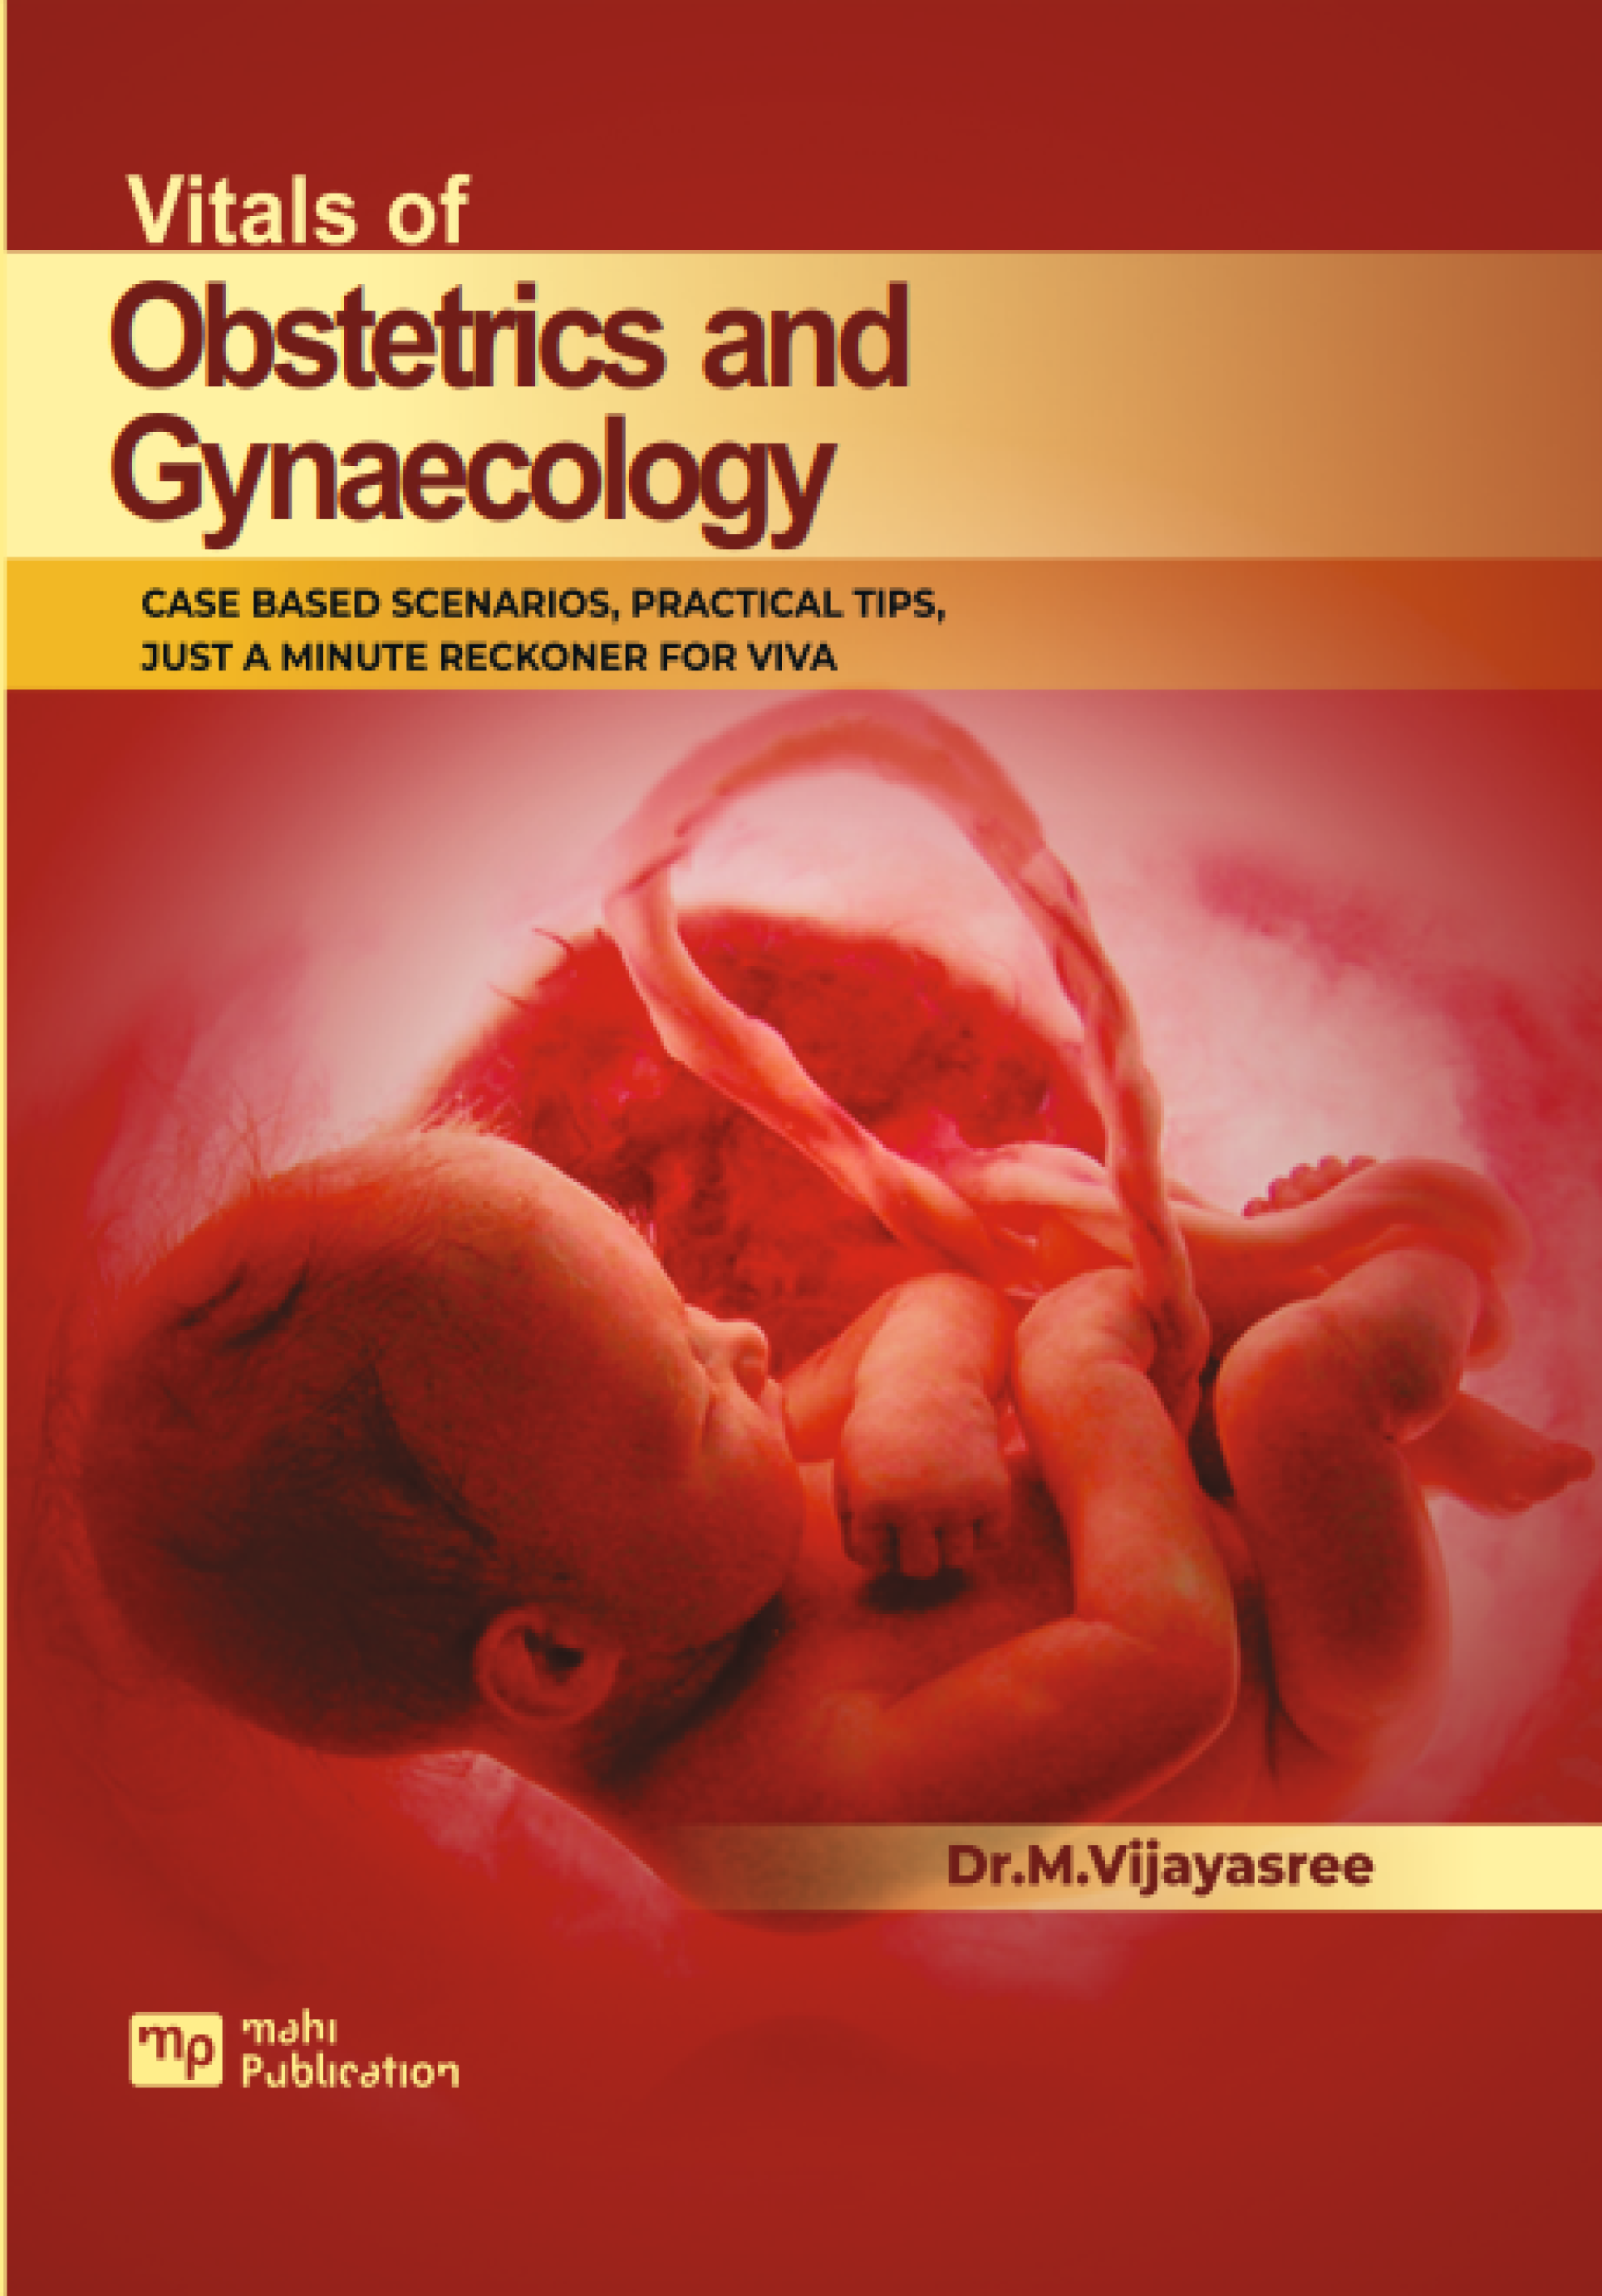 Vitals Of Obstetrics And Gynaecology Case Based Scenarios, Practical Tips, Just A Minute Reckoner For Viva